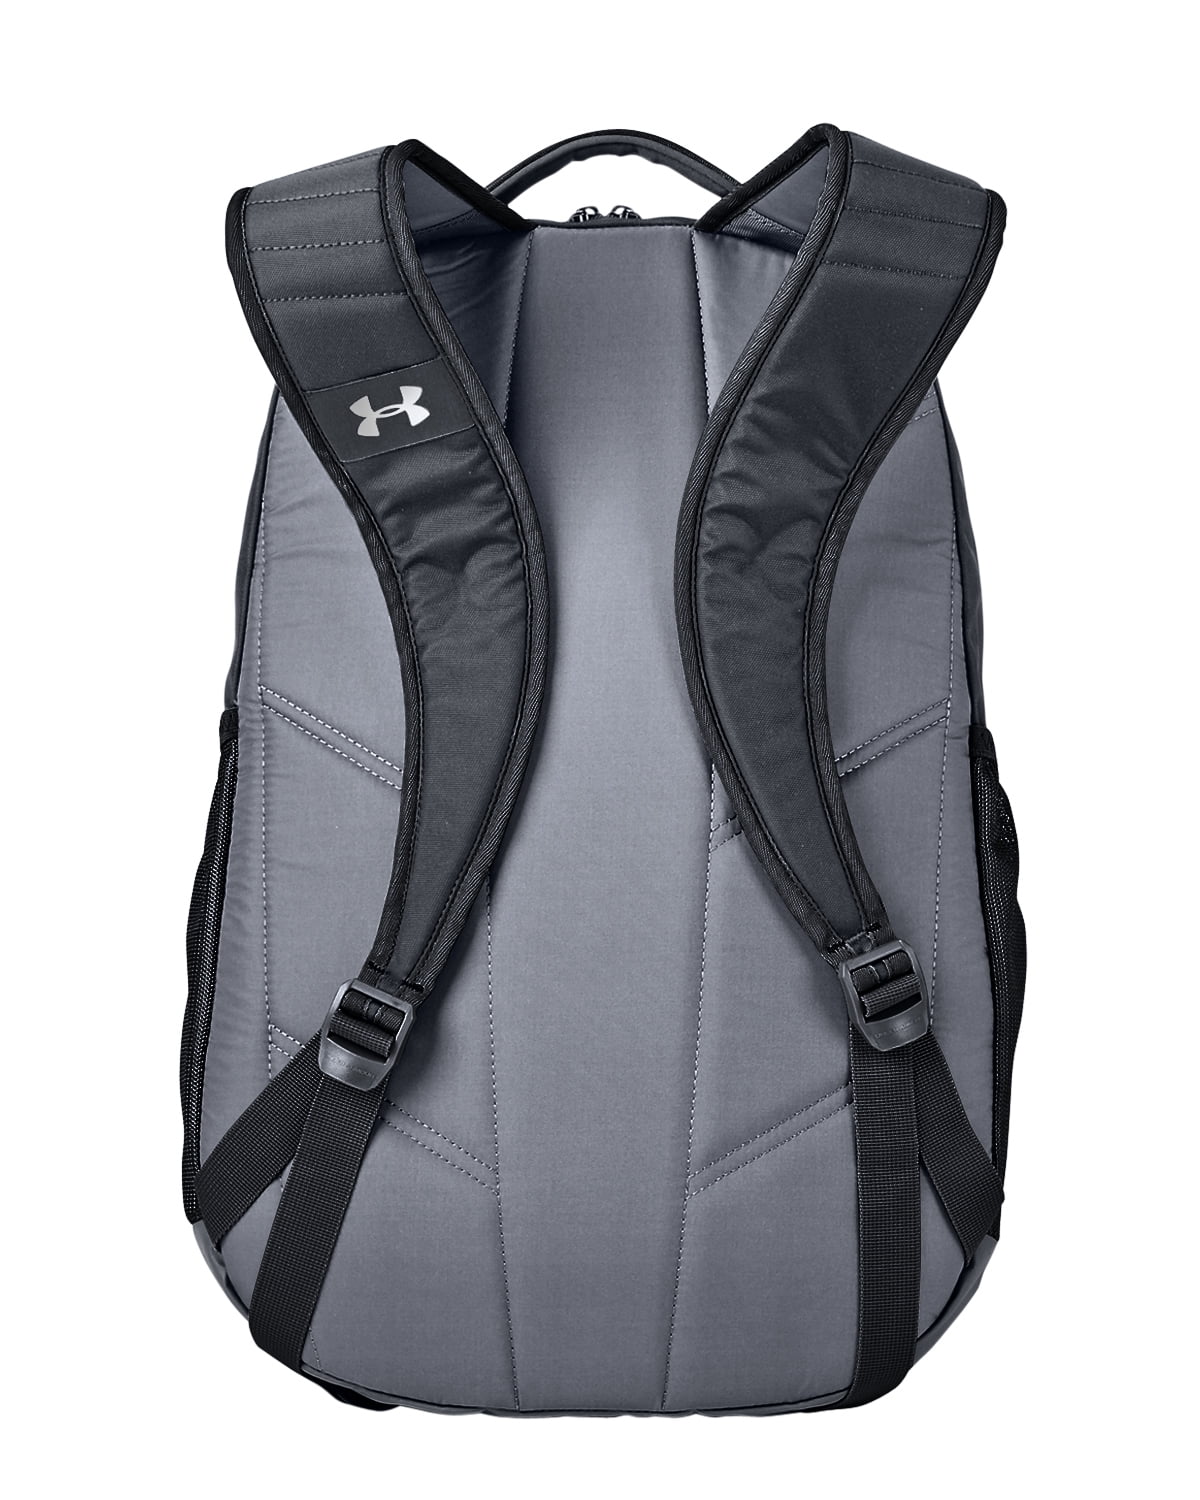 Under Armour Hustle 3.0 Backpack - Graphite - New Star